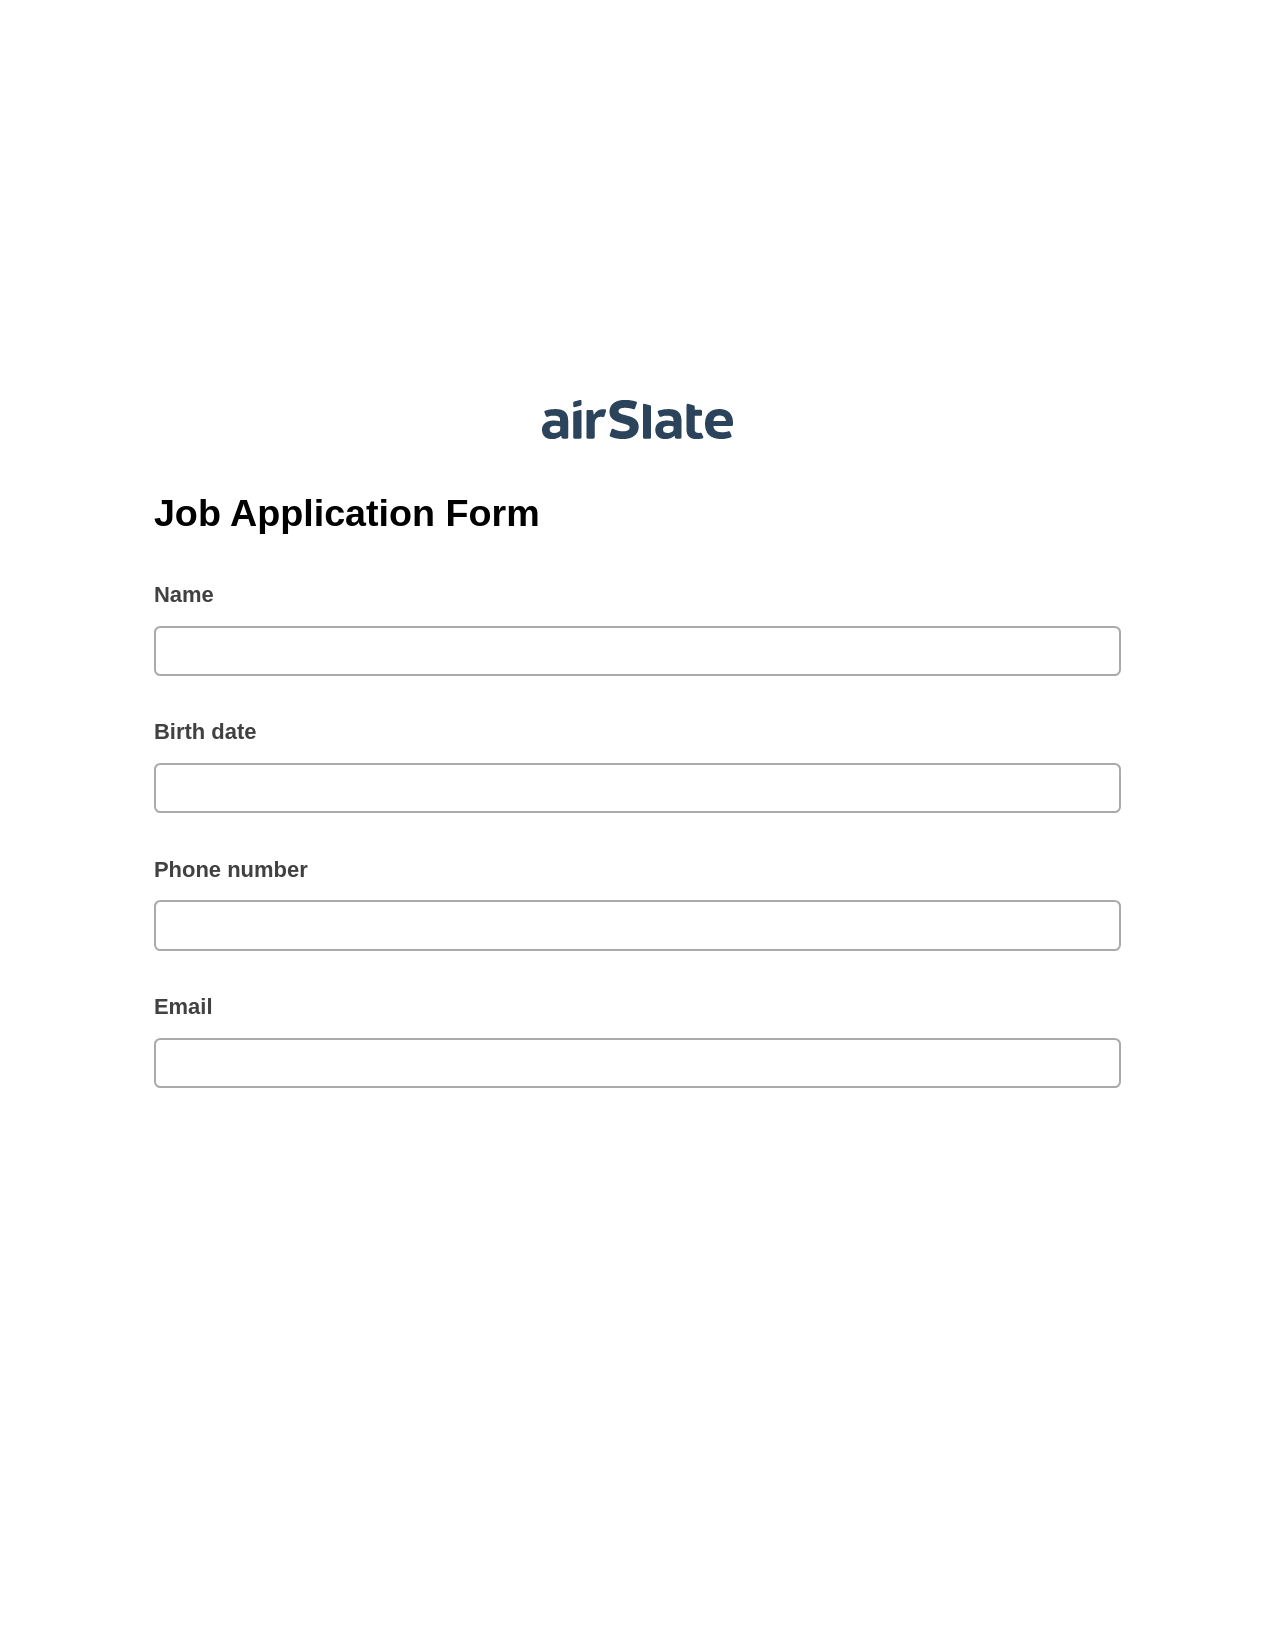 Job Application Form Pre-fill from Excel Spreadsheet Dropdown Options Bot, Mailchimp send Campaign bot, Dropbox Bot